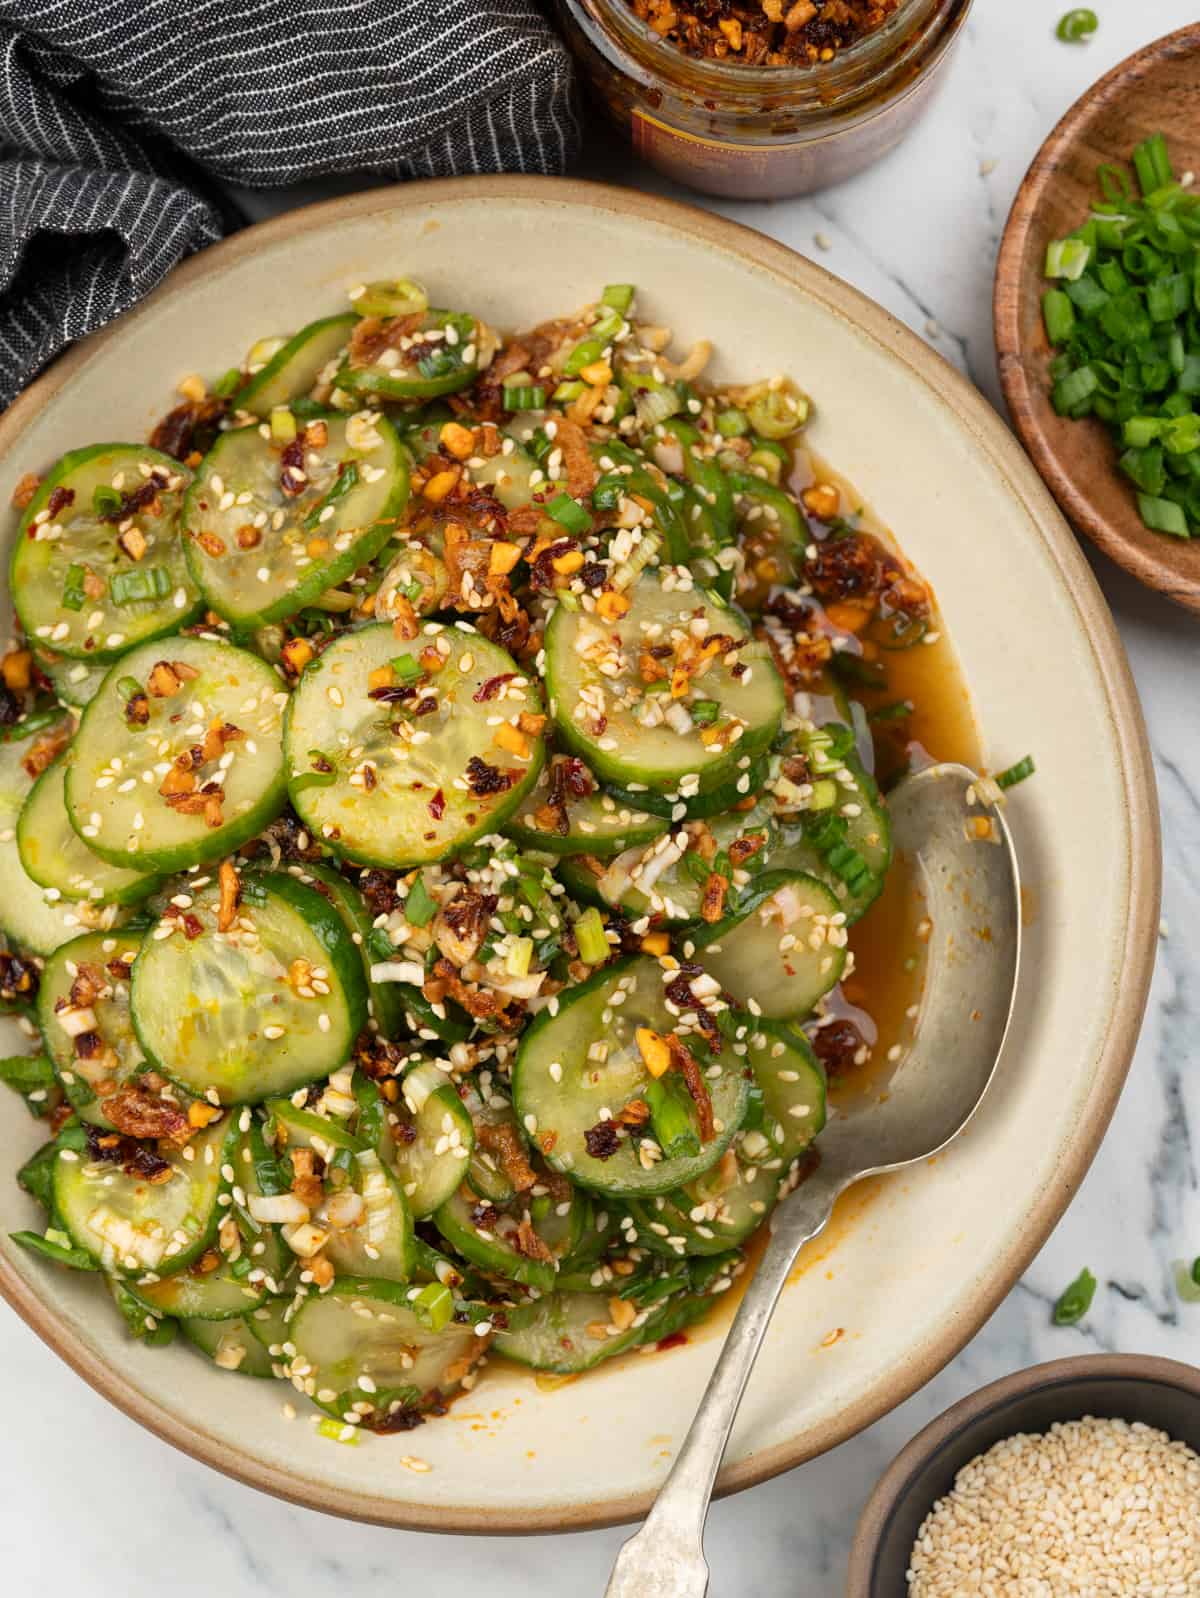 Sliced cucumbers, green onion tossed in a Asian inspired dressing, chilli crisp and toasted sesame seeds.